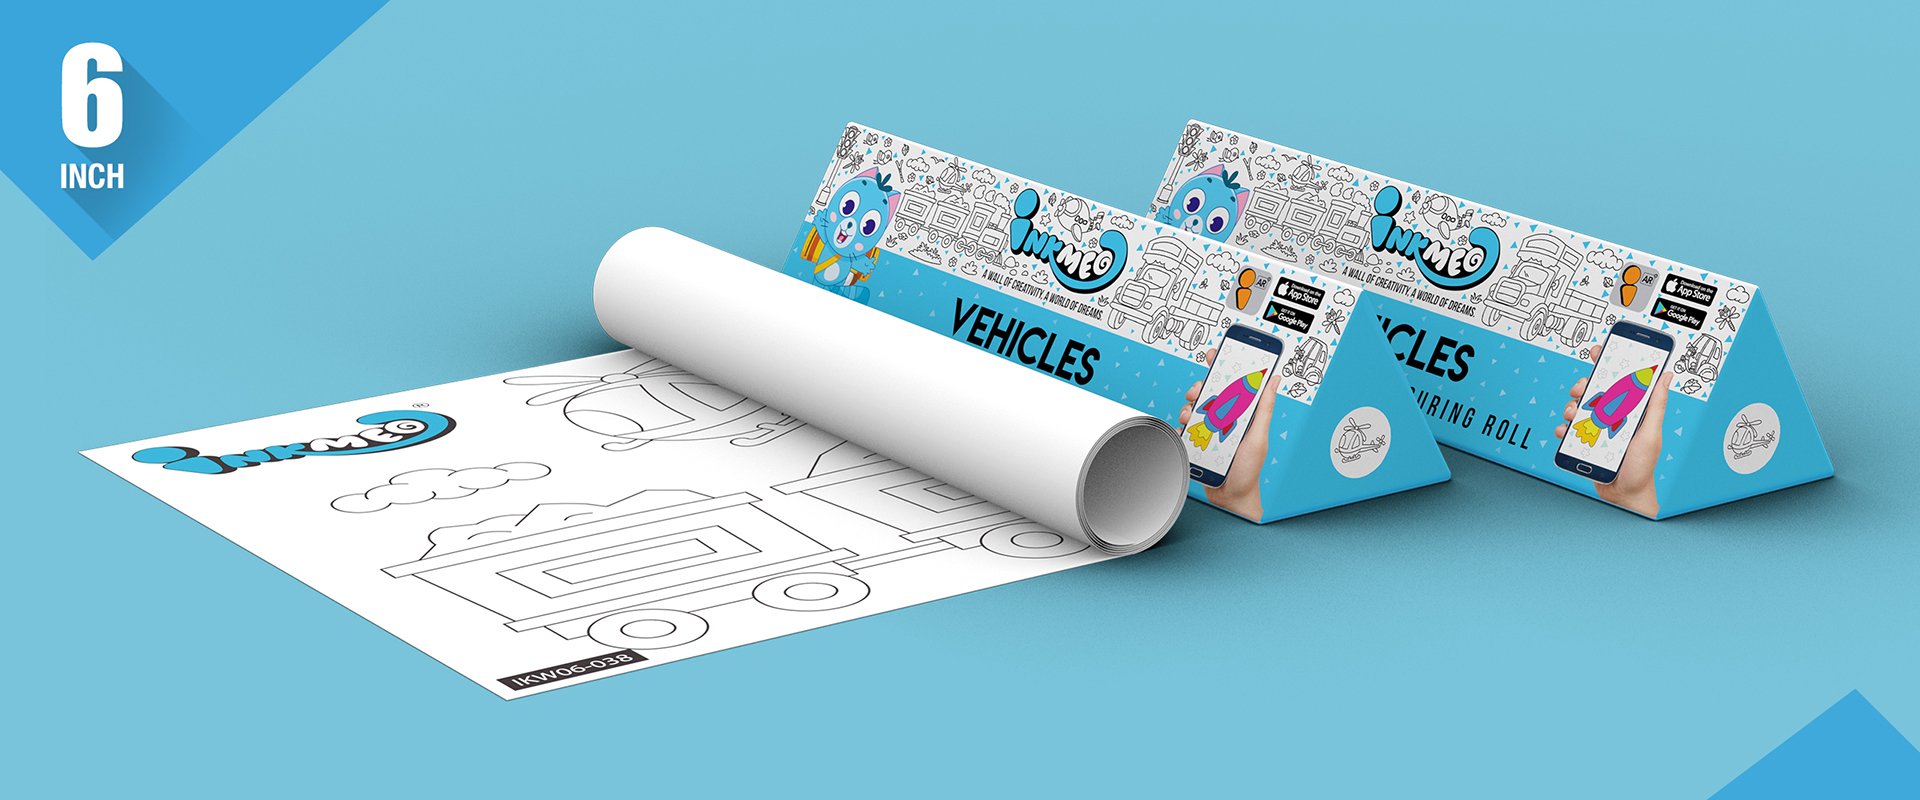 The image depicts two 6*40-inch blue triangular vehicle boxes placed alongside each other, with a sheet rolled out next to them.